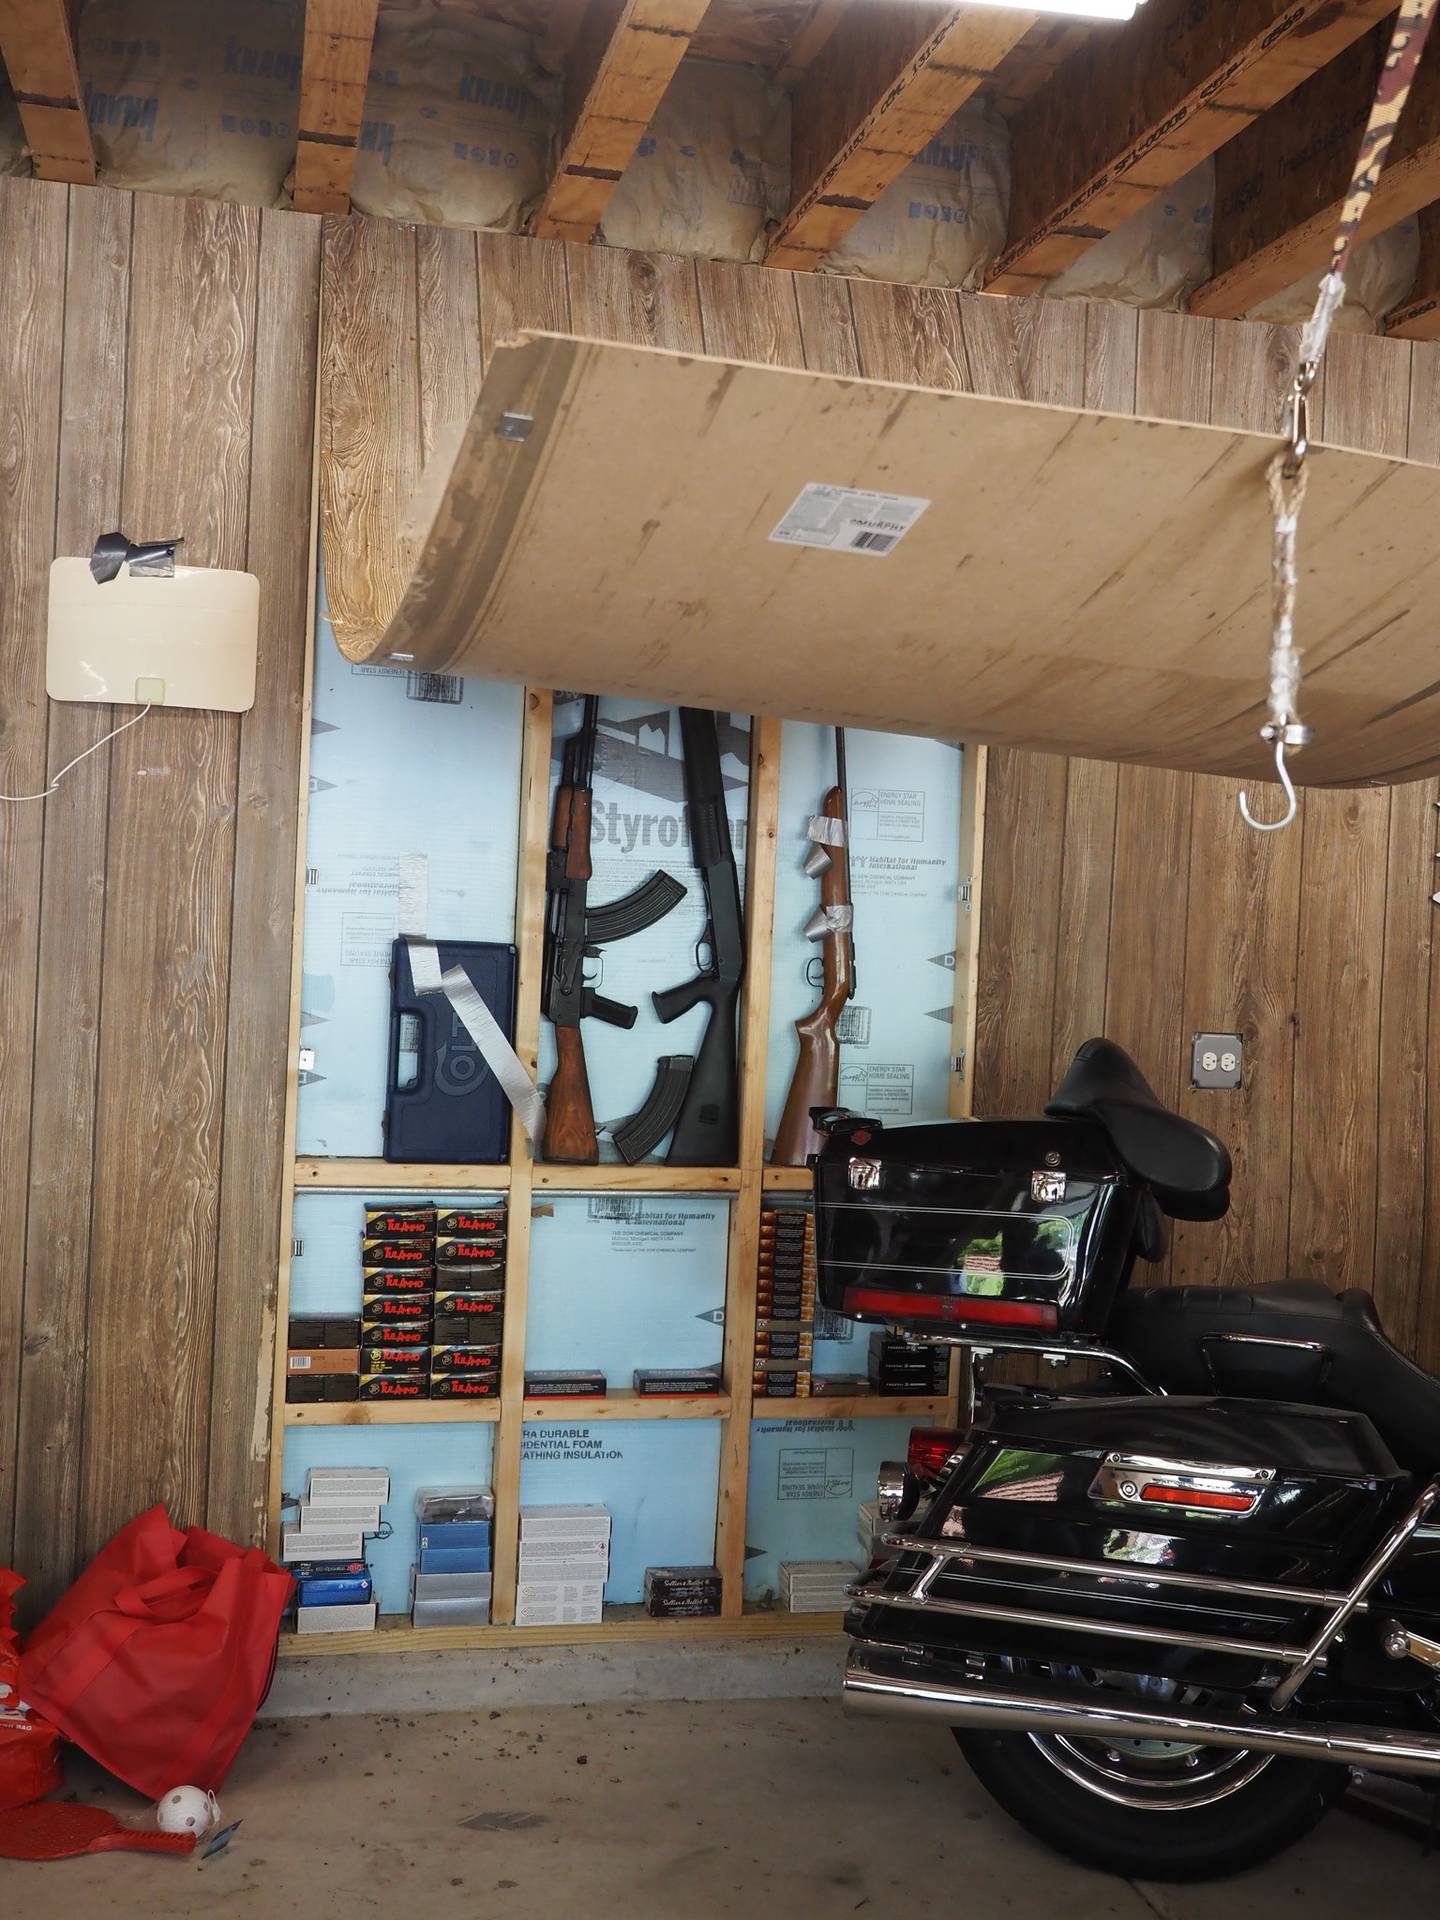 Multiple guns were uncovered behind a hidden panel inside John Shadbar's garage during a police search of the property.